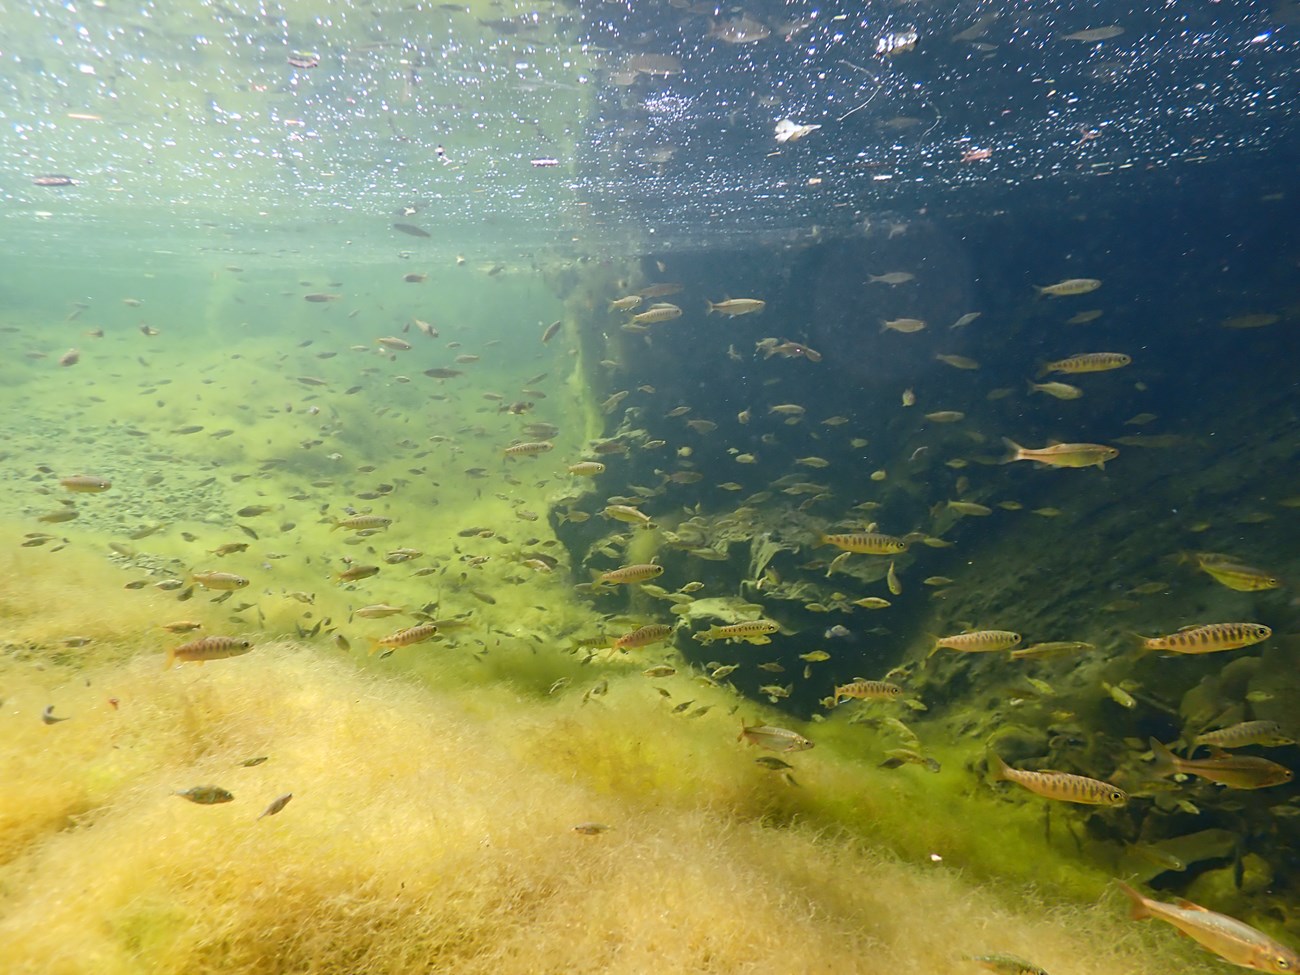 Underwater view of a large creek pool filled with hundreds of small fish.